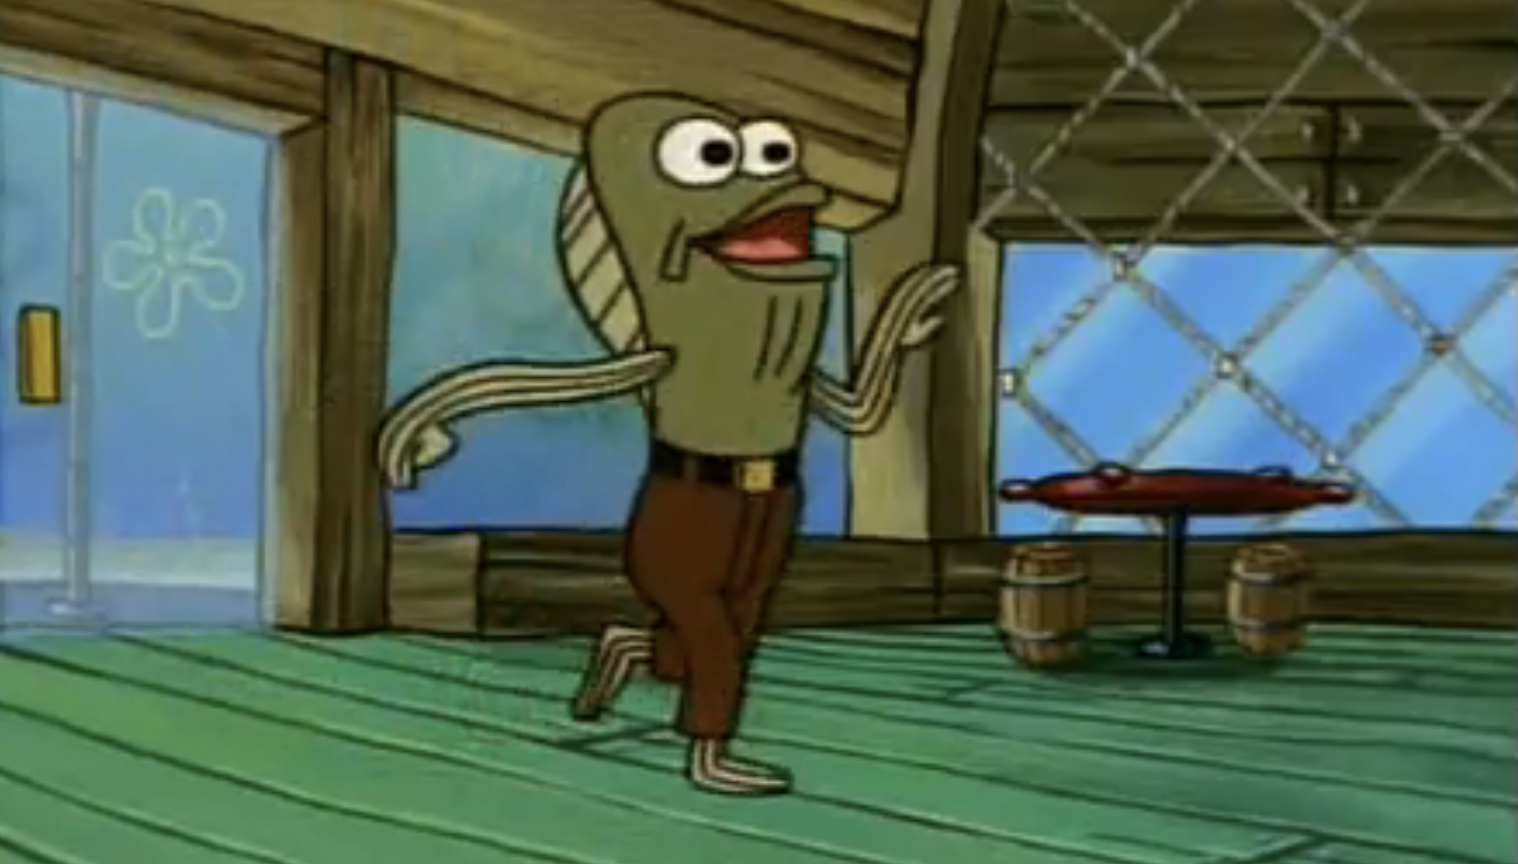 Fred the Fish from SpongeBob SquarePants walks inside the Krusty Krab restaurant. He appears animated and expressive